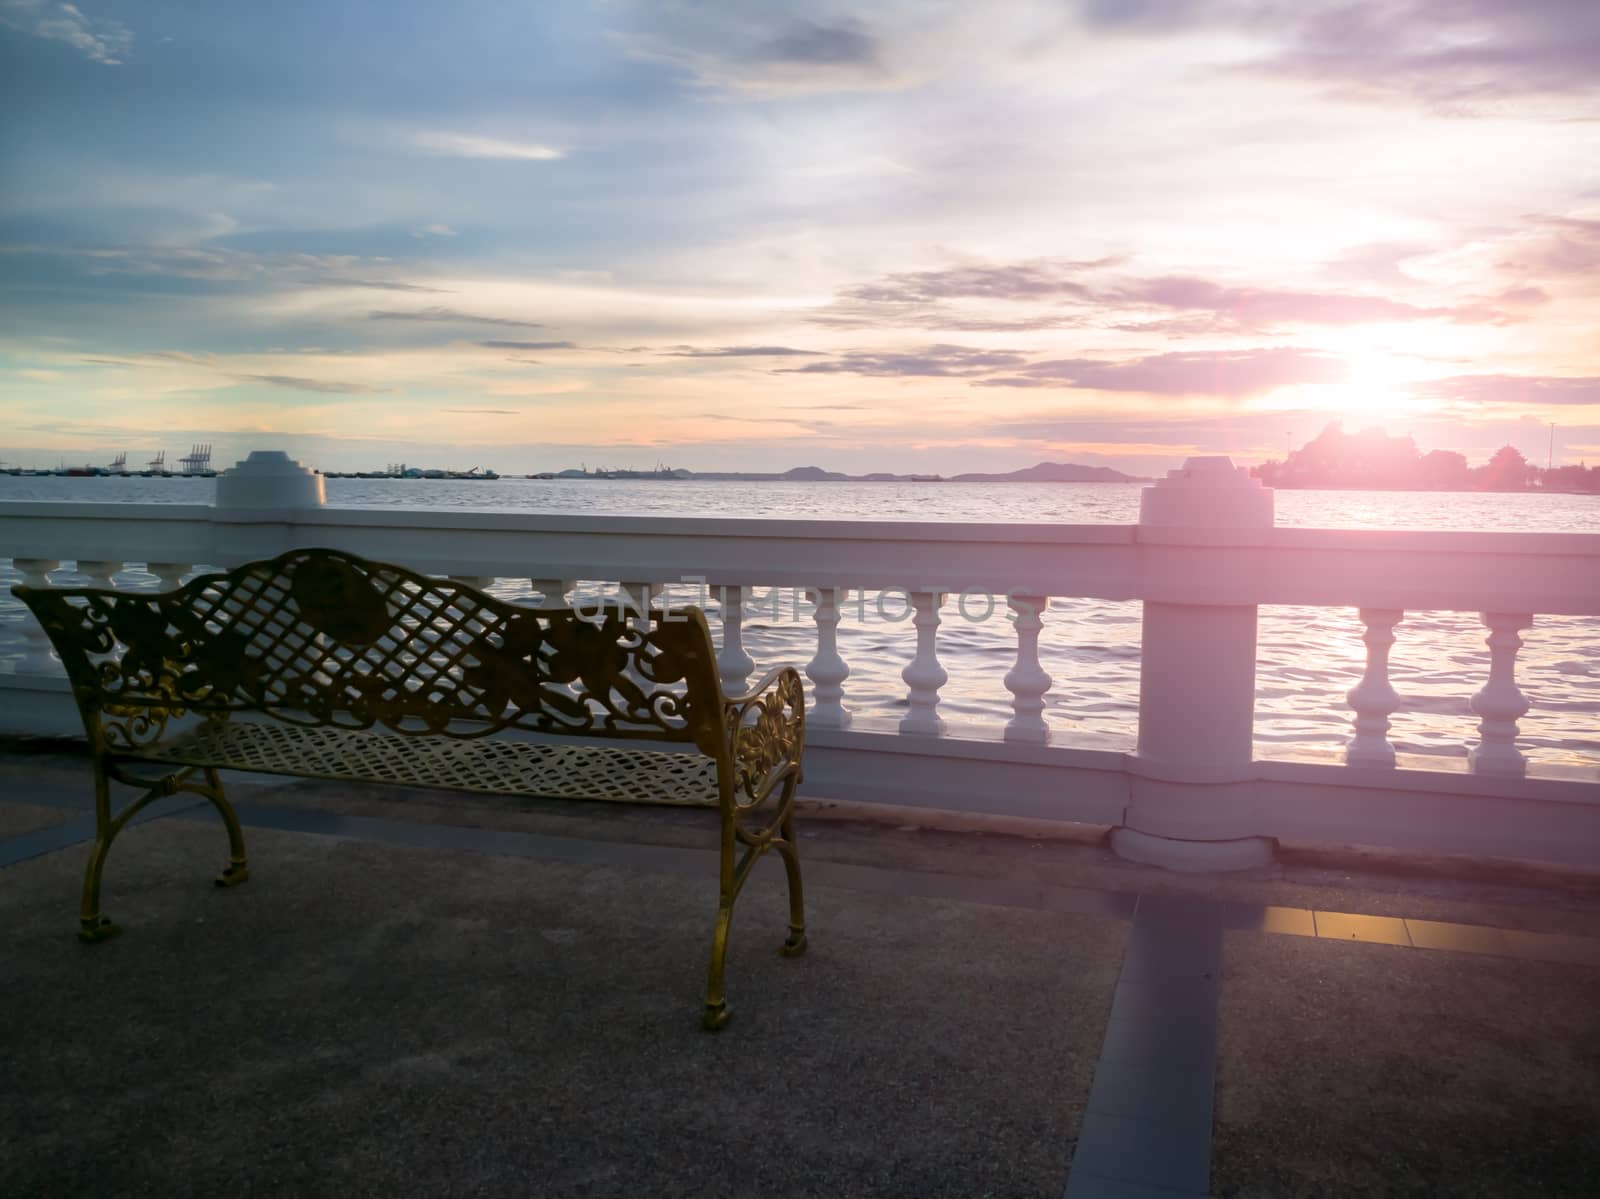 the lonely chair and sunset at the riverside, sunlight landscape background